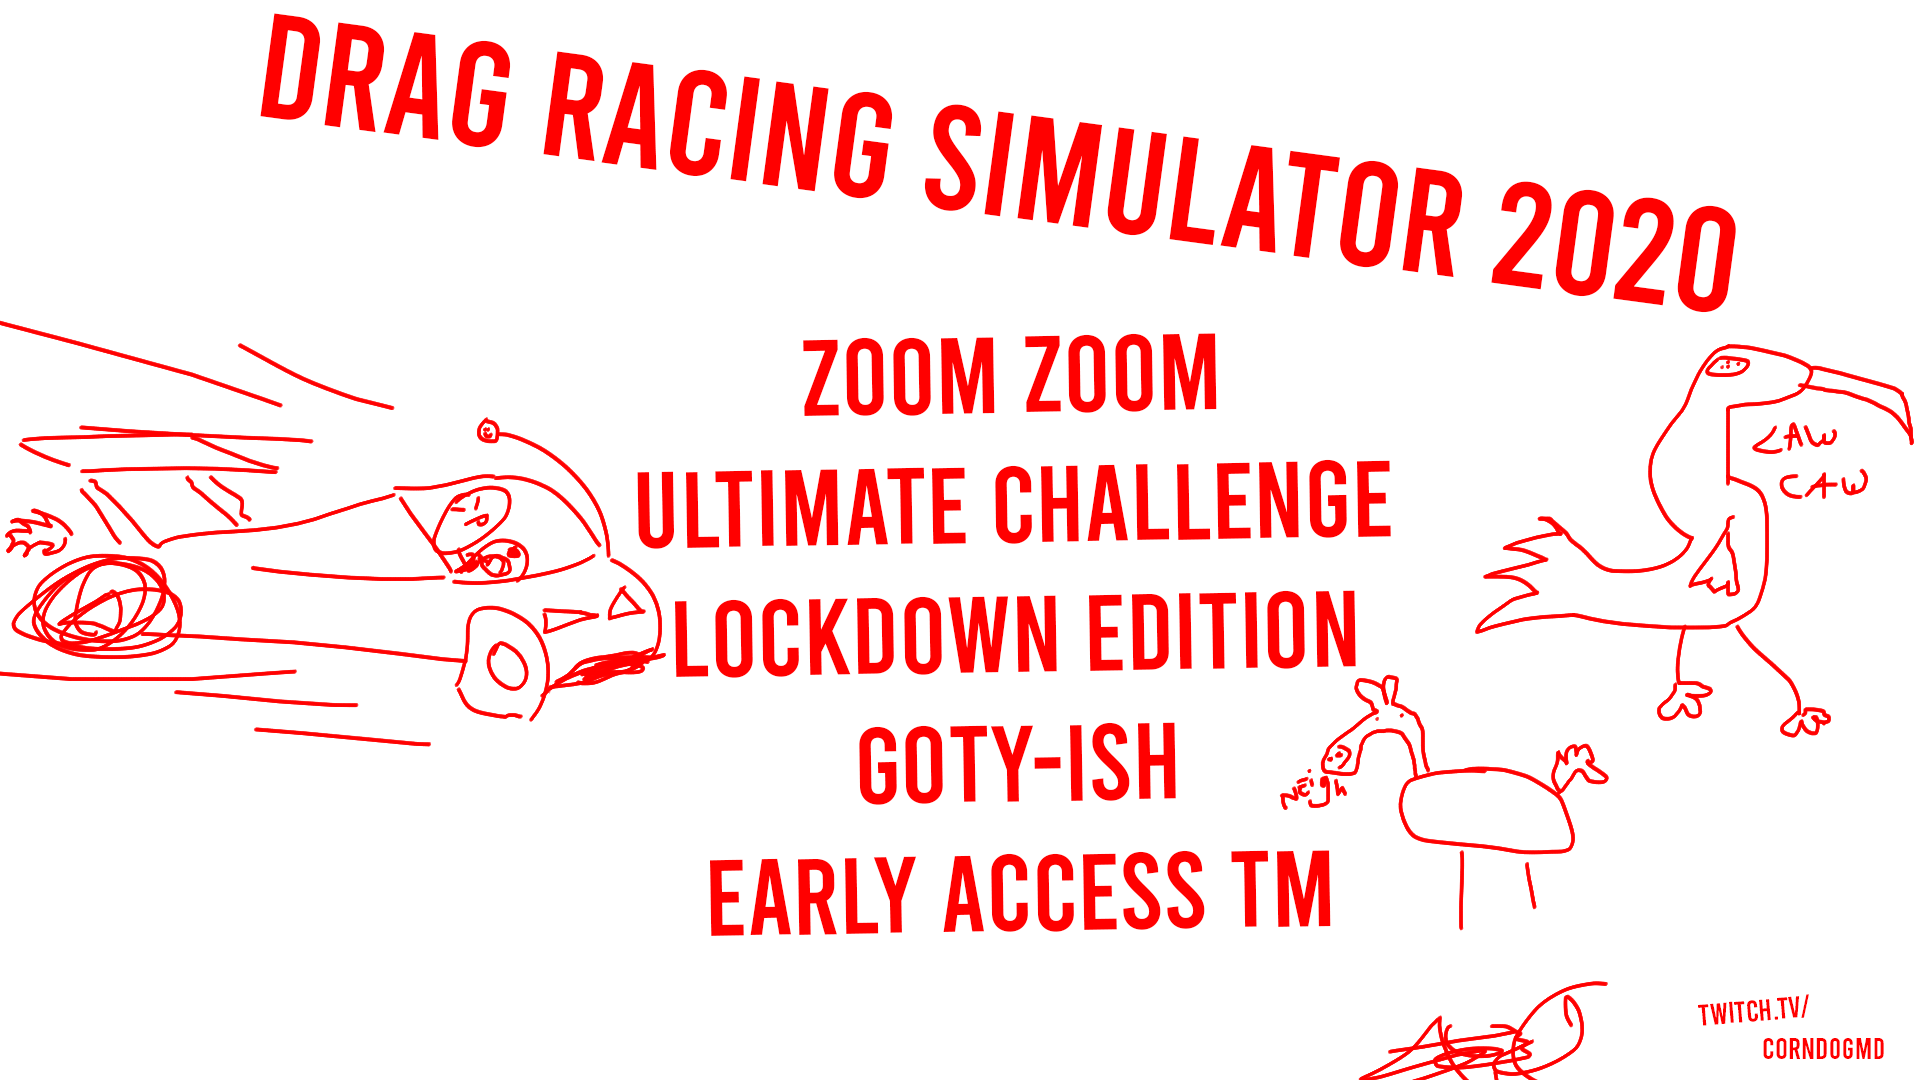 Drag Racing Simulator 2020 Zoom Zoom Ultimate Challenge Lockdown Edition GOTY-ish Early Access TM